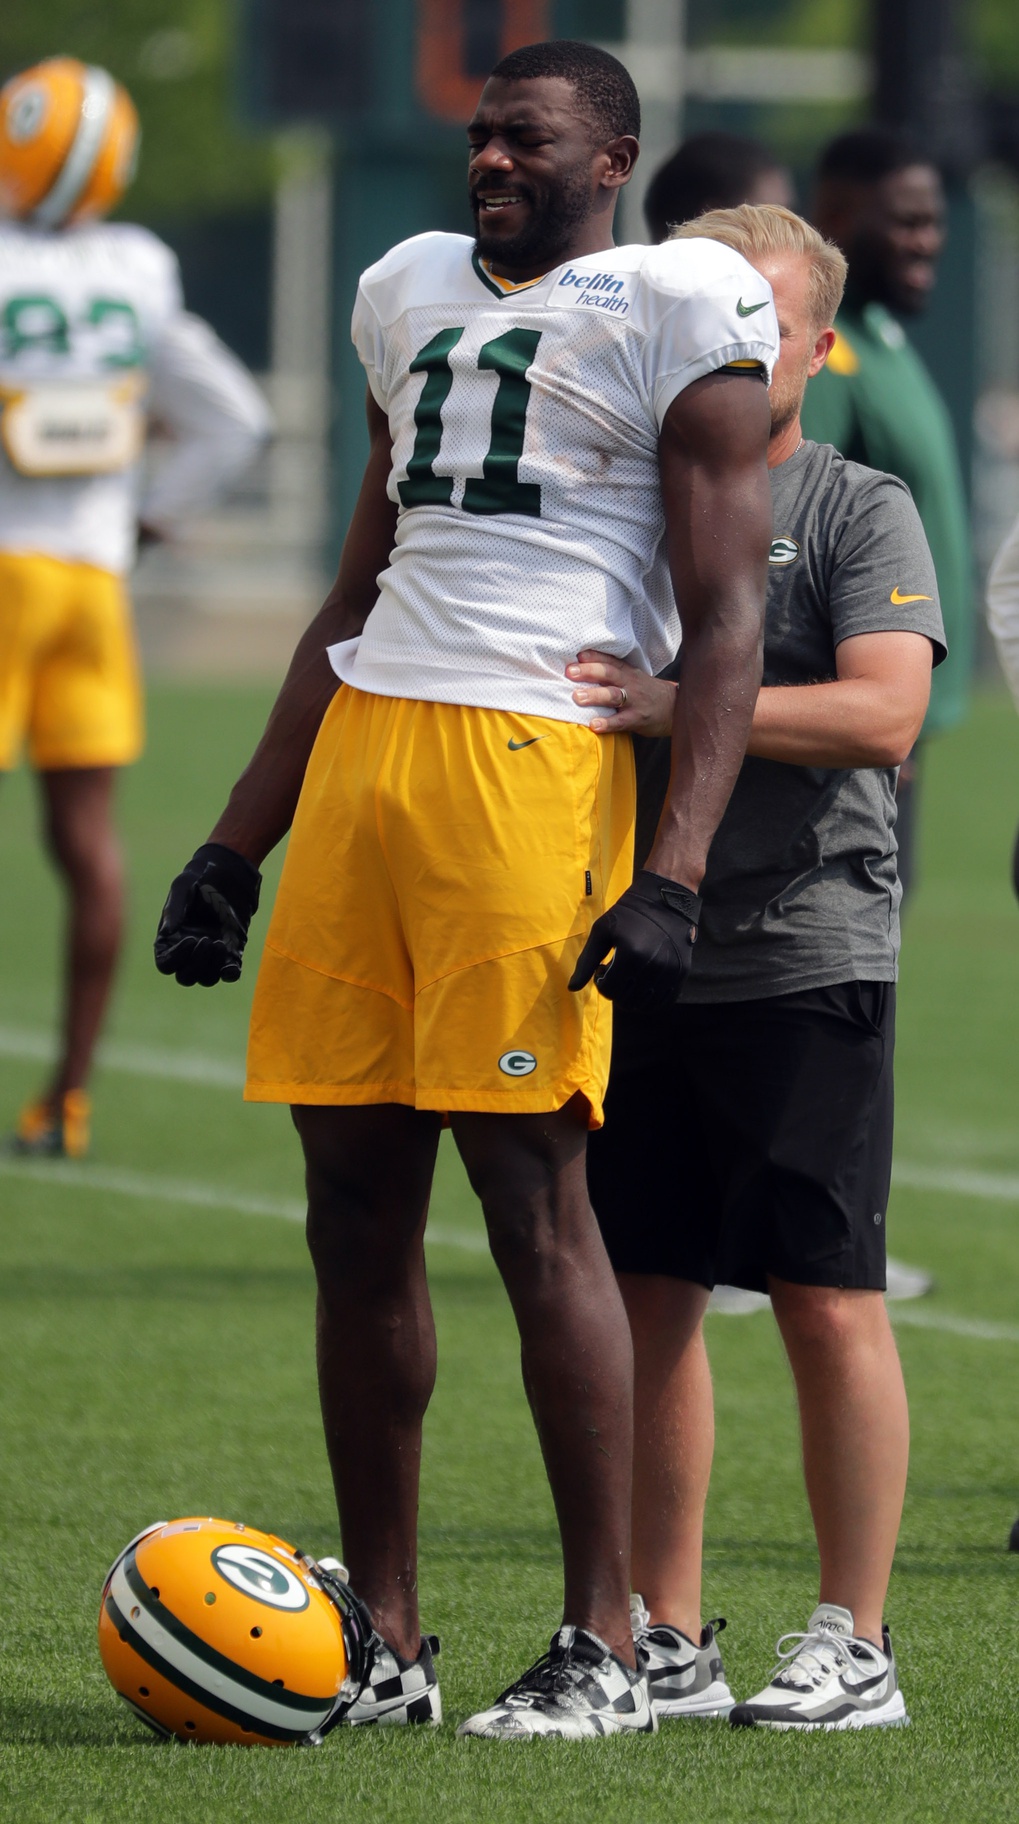 Aug 11, 2021; Green Bay, WI, USA; Green Bay Packers wide receiver Devin Funchess (11) works with a member of the training staff during training camp Wednesday, August 11, 2021 in Green Bay, Wis. Mandatory Credit: Mark Hoffman-USA TODAY NETWORK